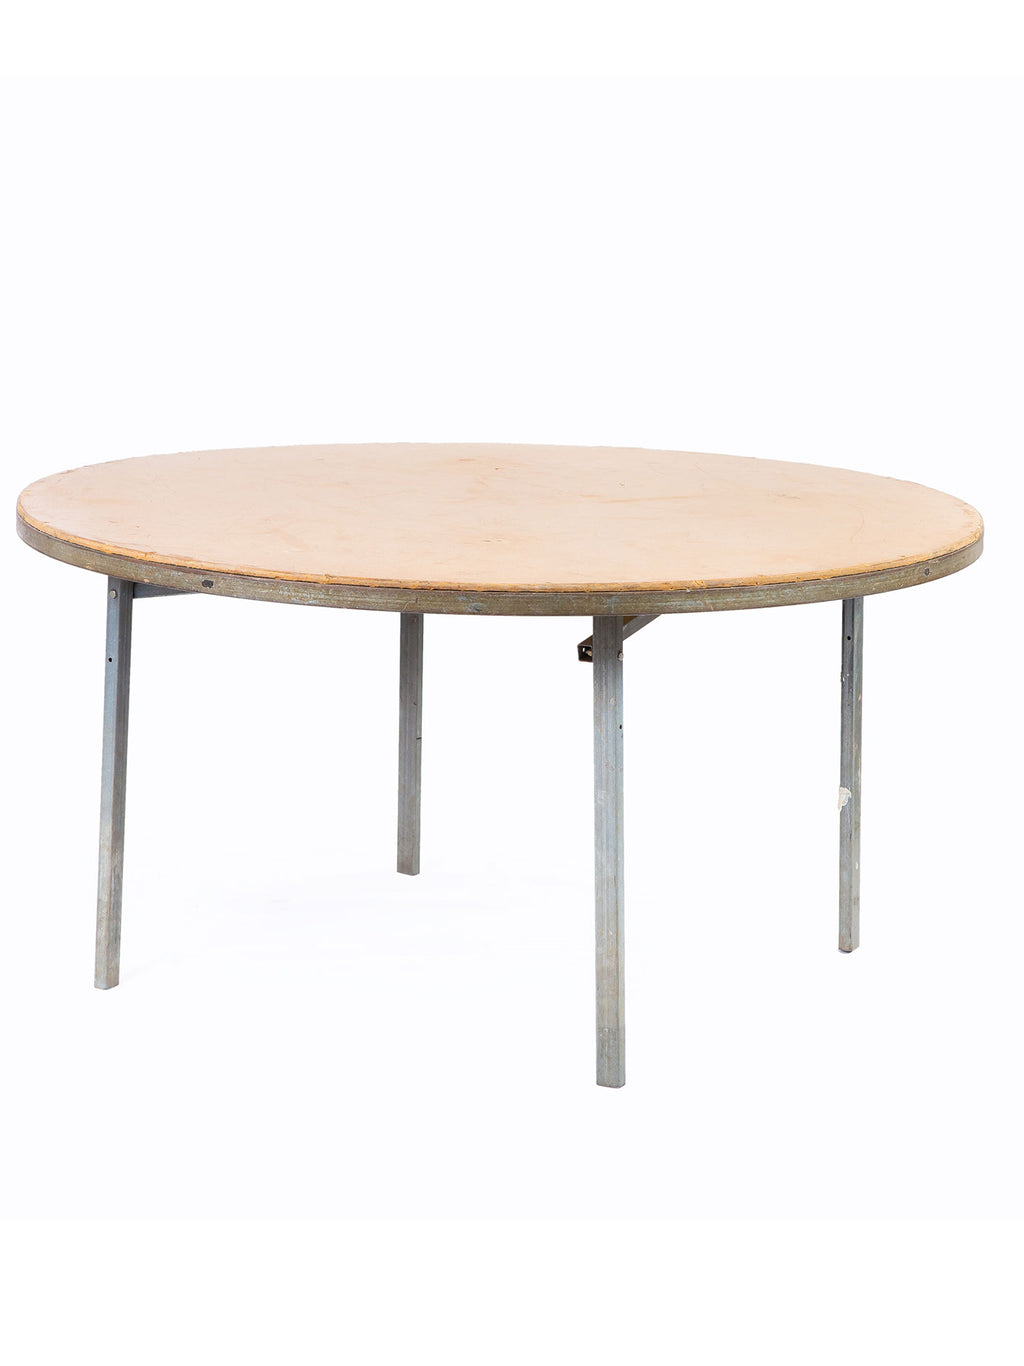 Round 5ft Table